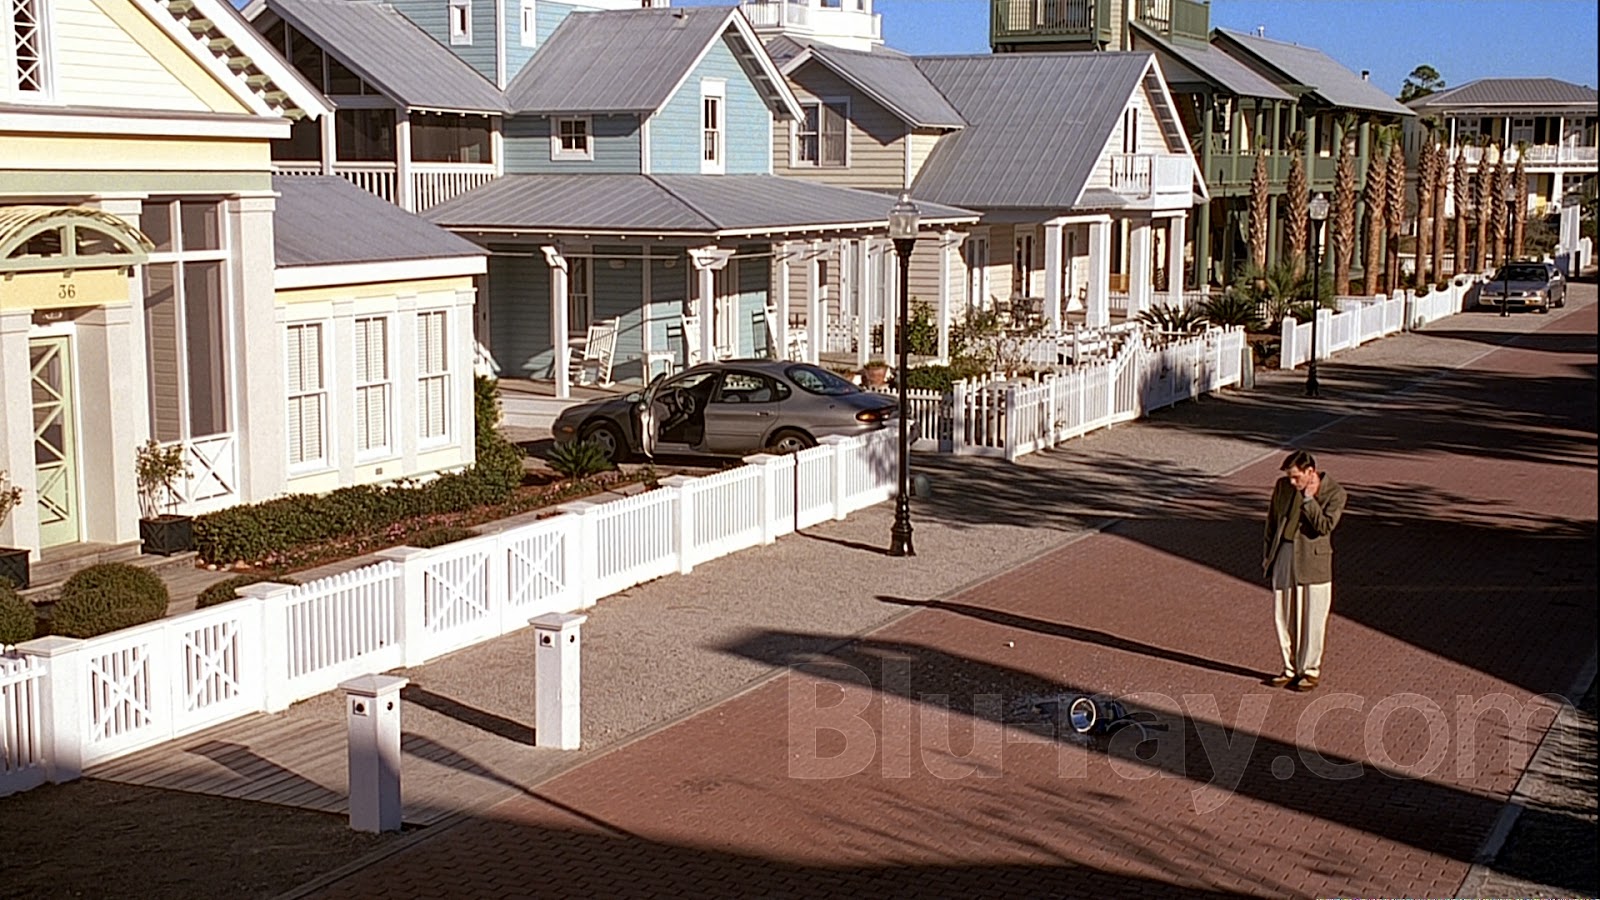 Philips Journal: Production Design of The Truman Show